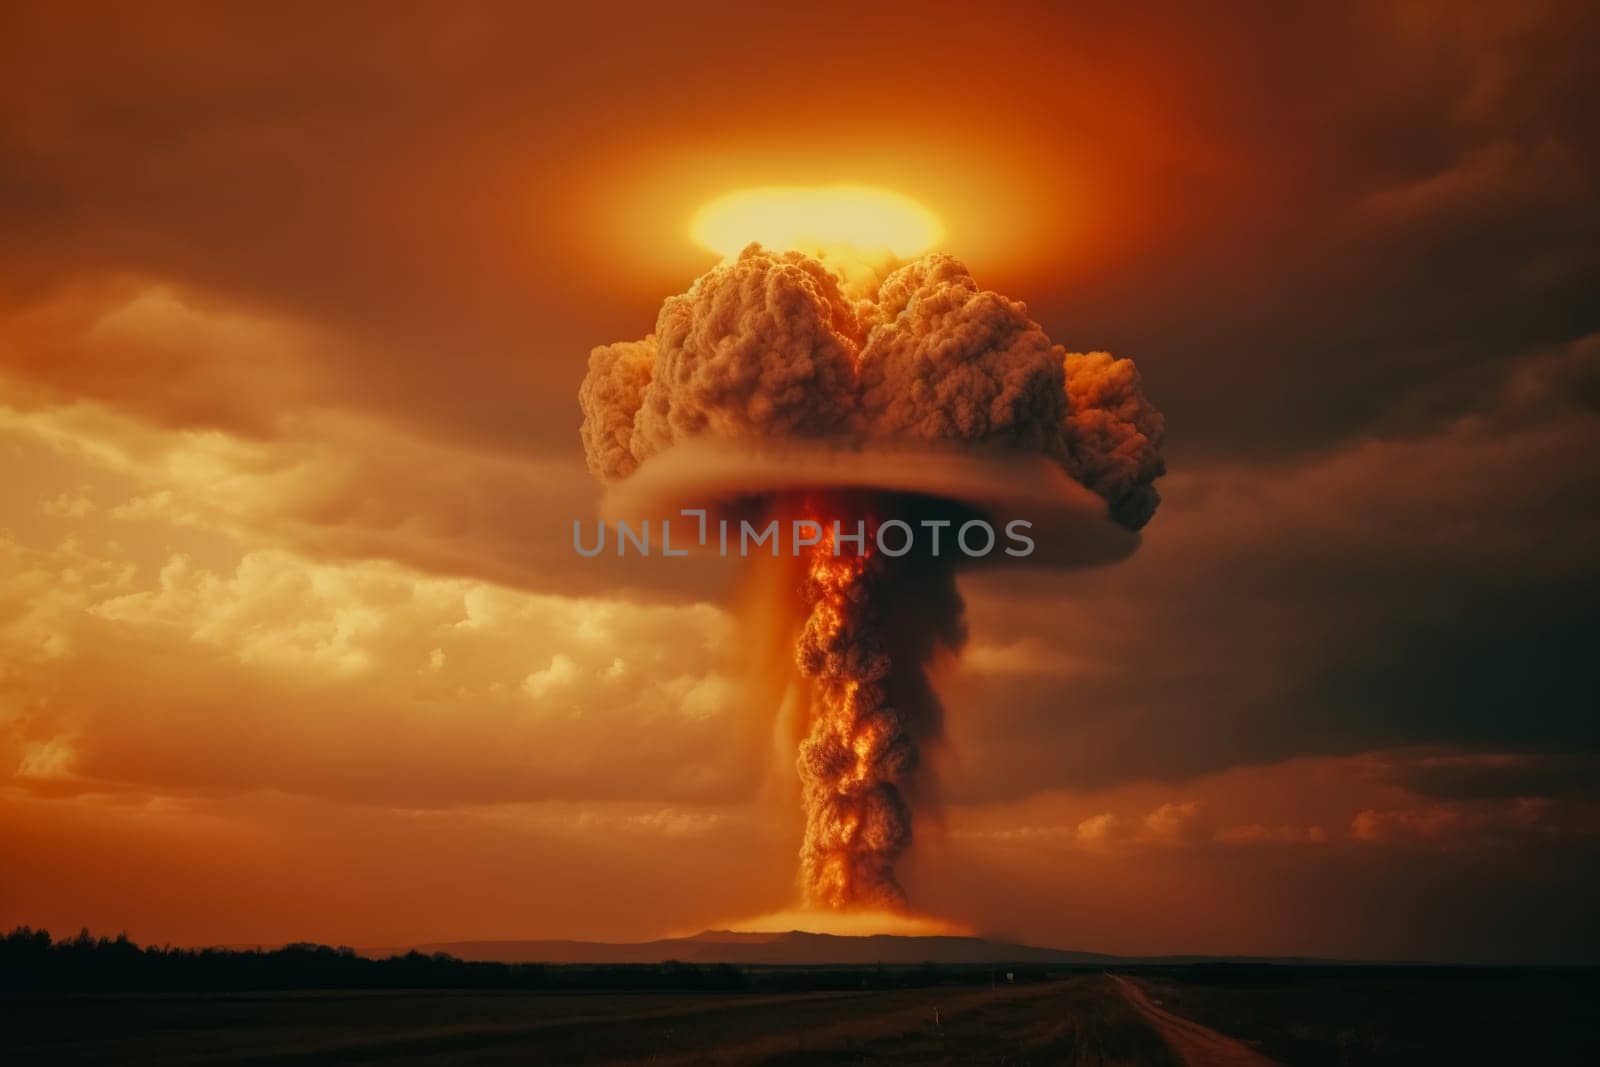 Dramatic depiction of a nuclear explosion, with a massive mushroom cloud rising against a stormy sky, evoking the powerful force and devastating impact of nuclear energy